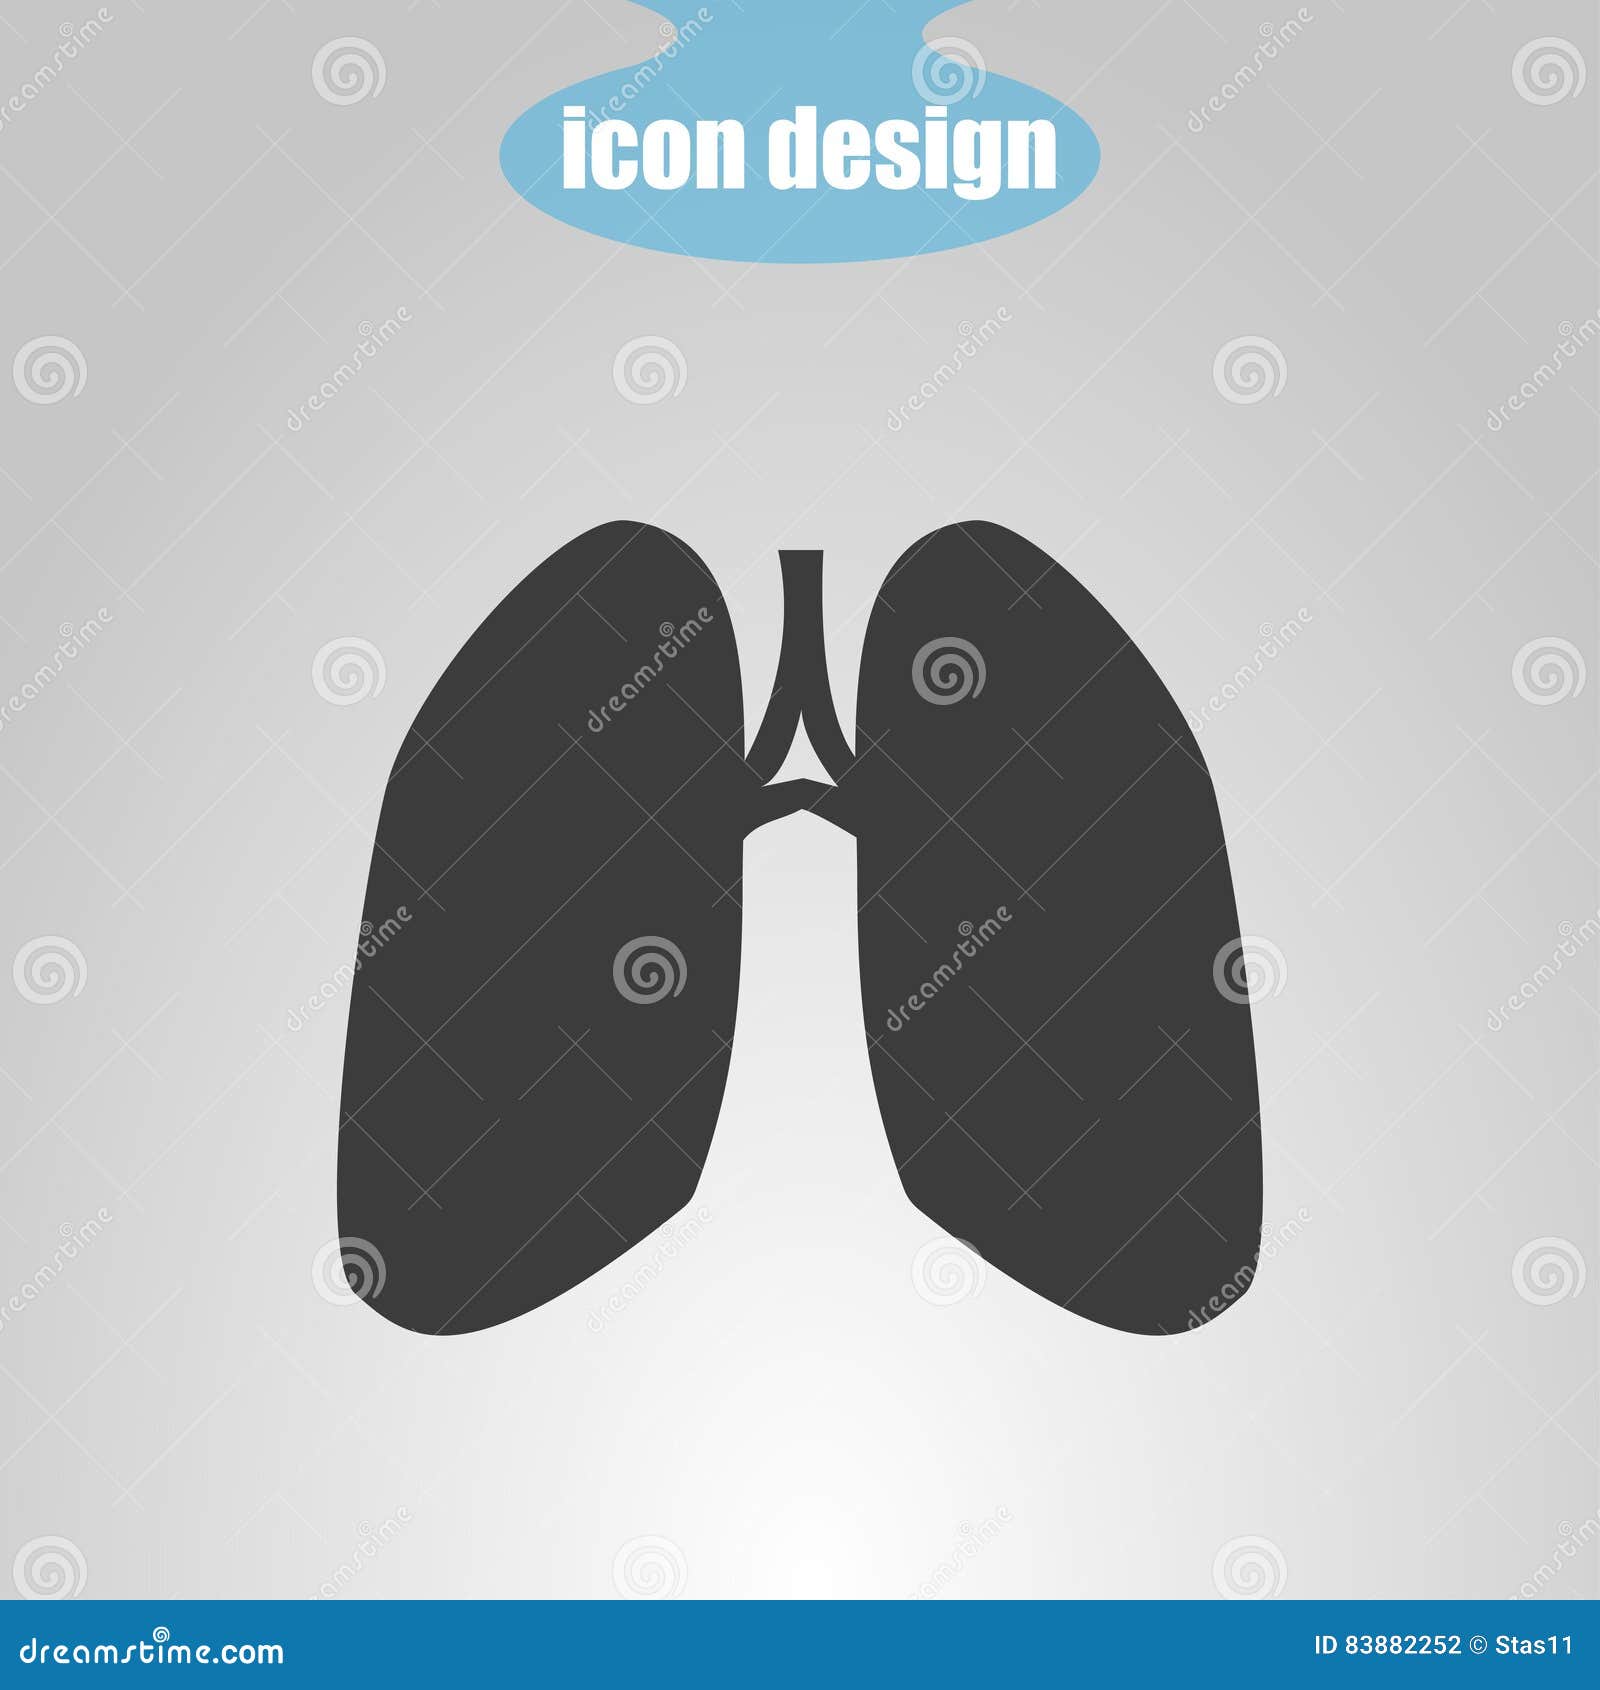 icon of lungs on a gray background.  